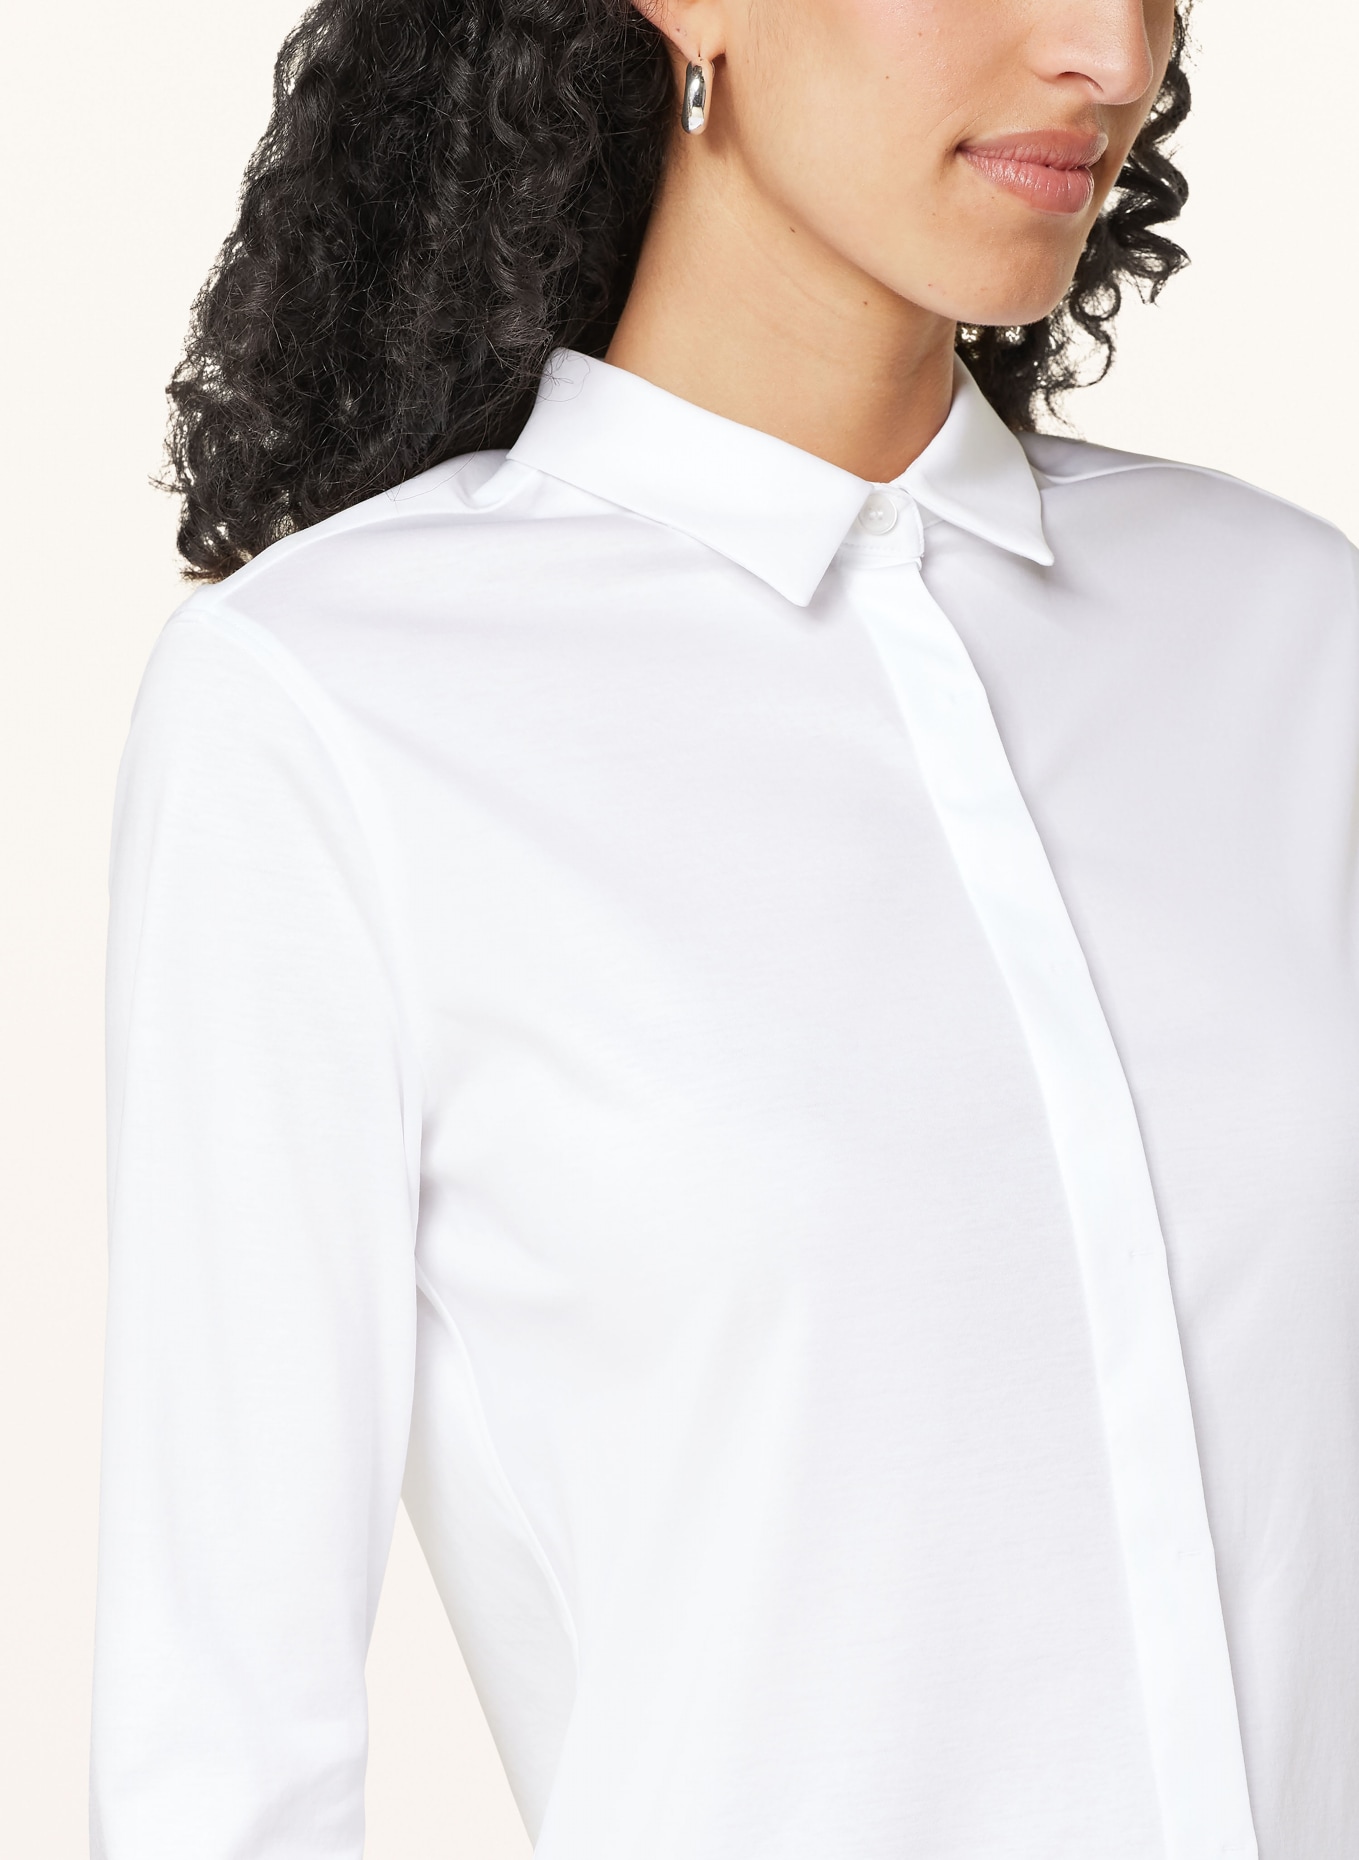 RIANI Shirt blouse made of jersey, Color: WHITE (Image 4)